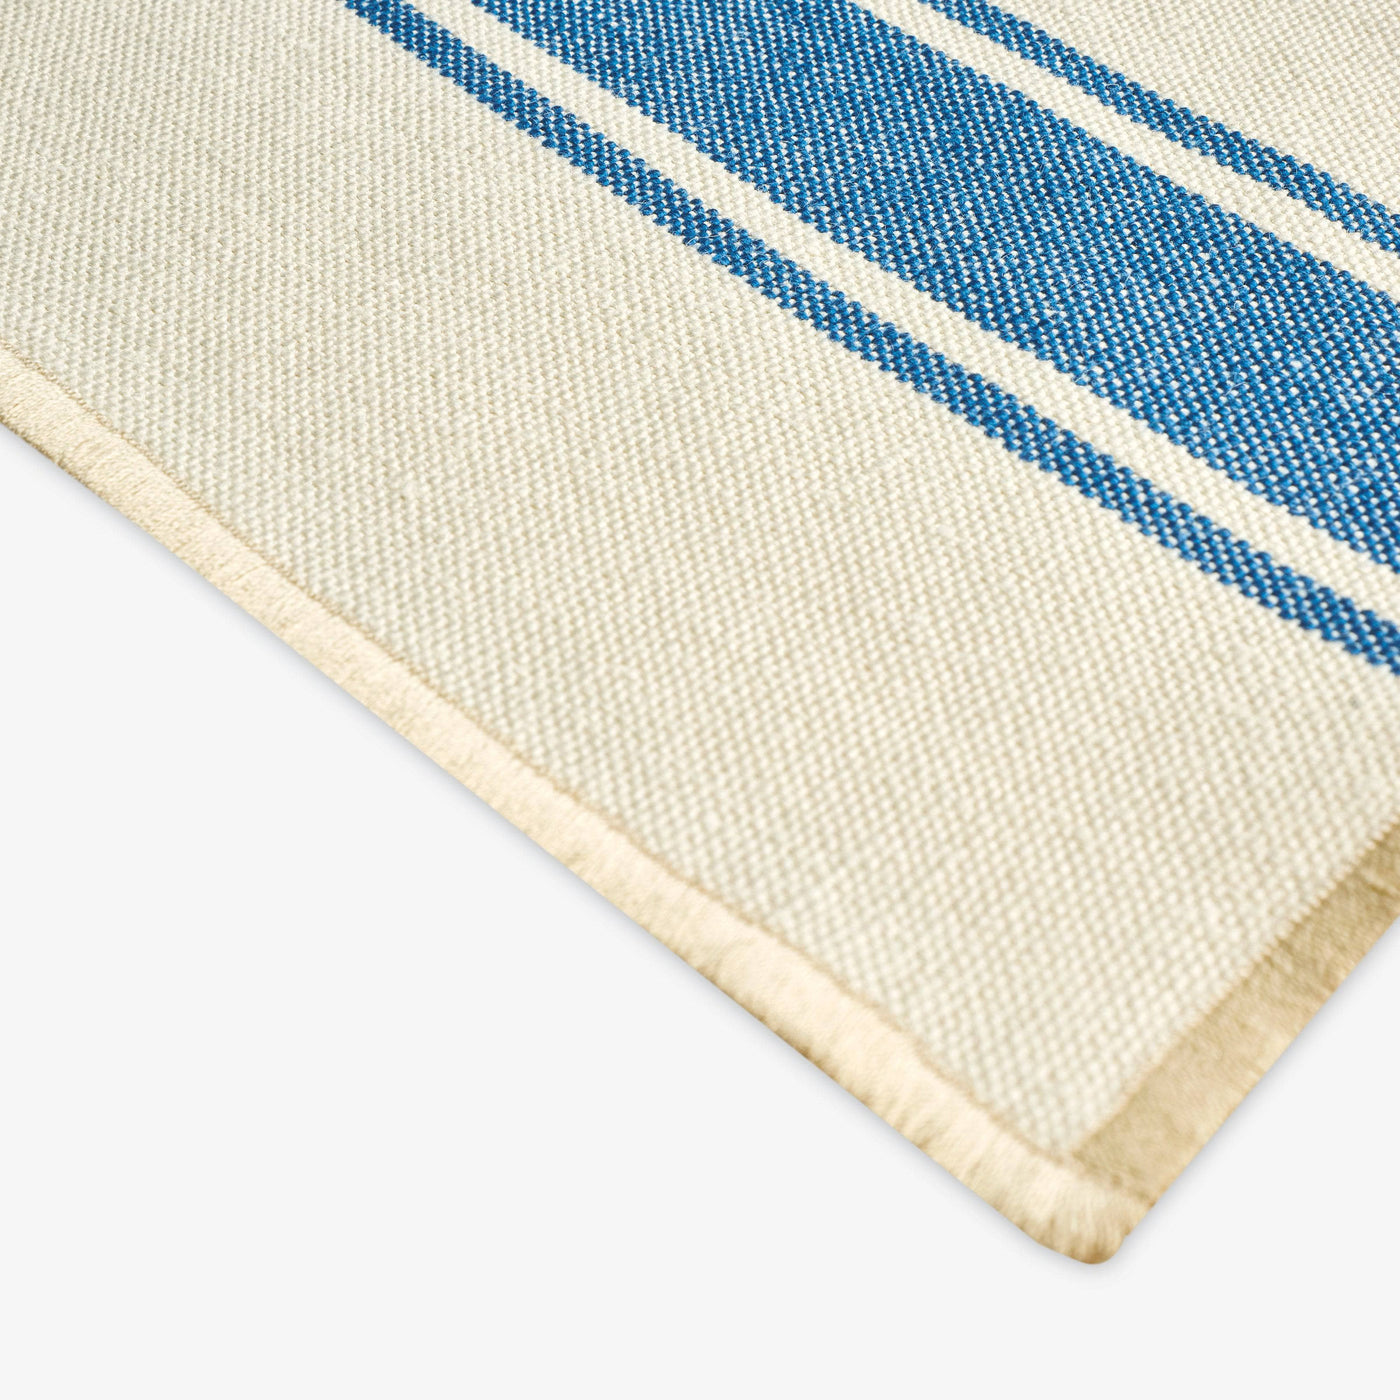 Mary Striped Table Runner, Natural - Blue, 46x150 cm 5